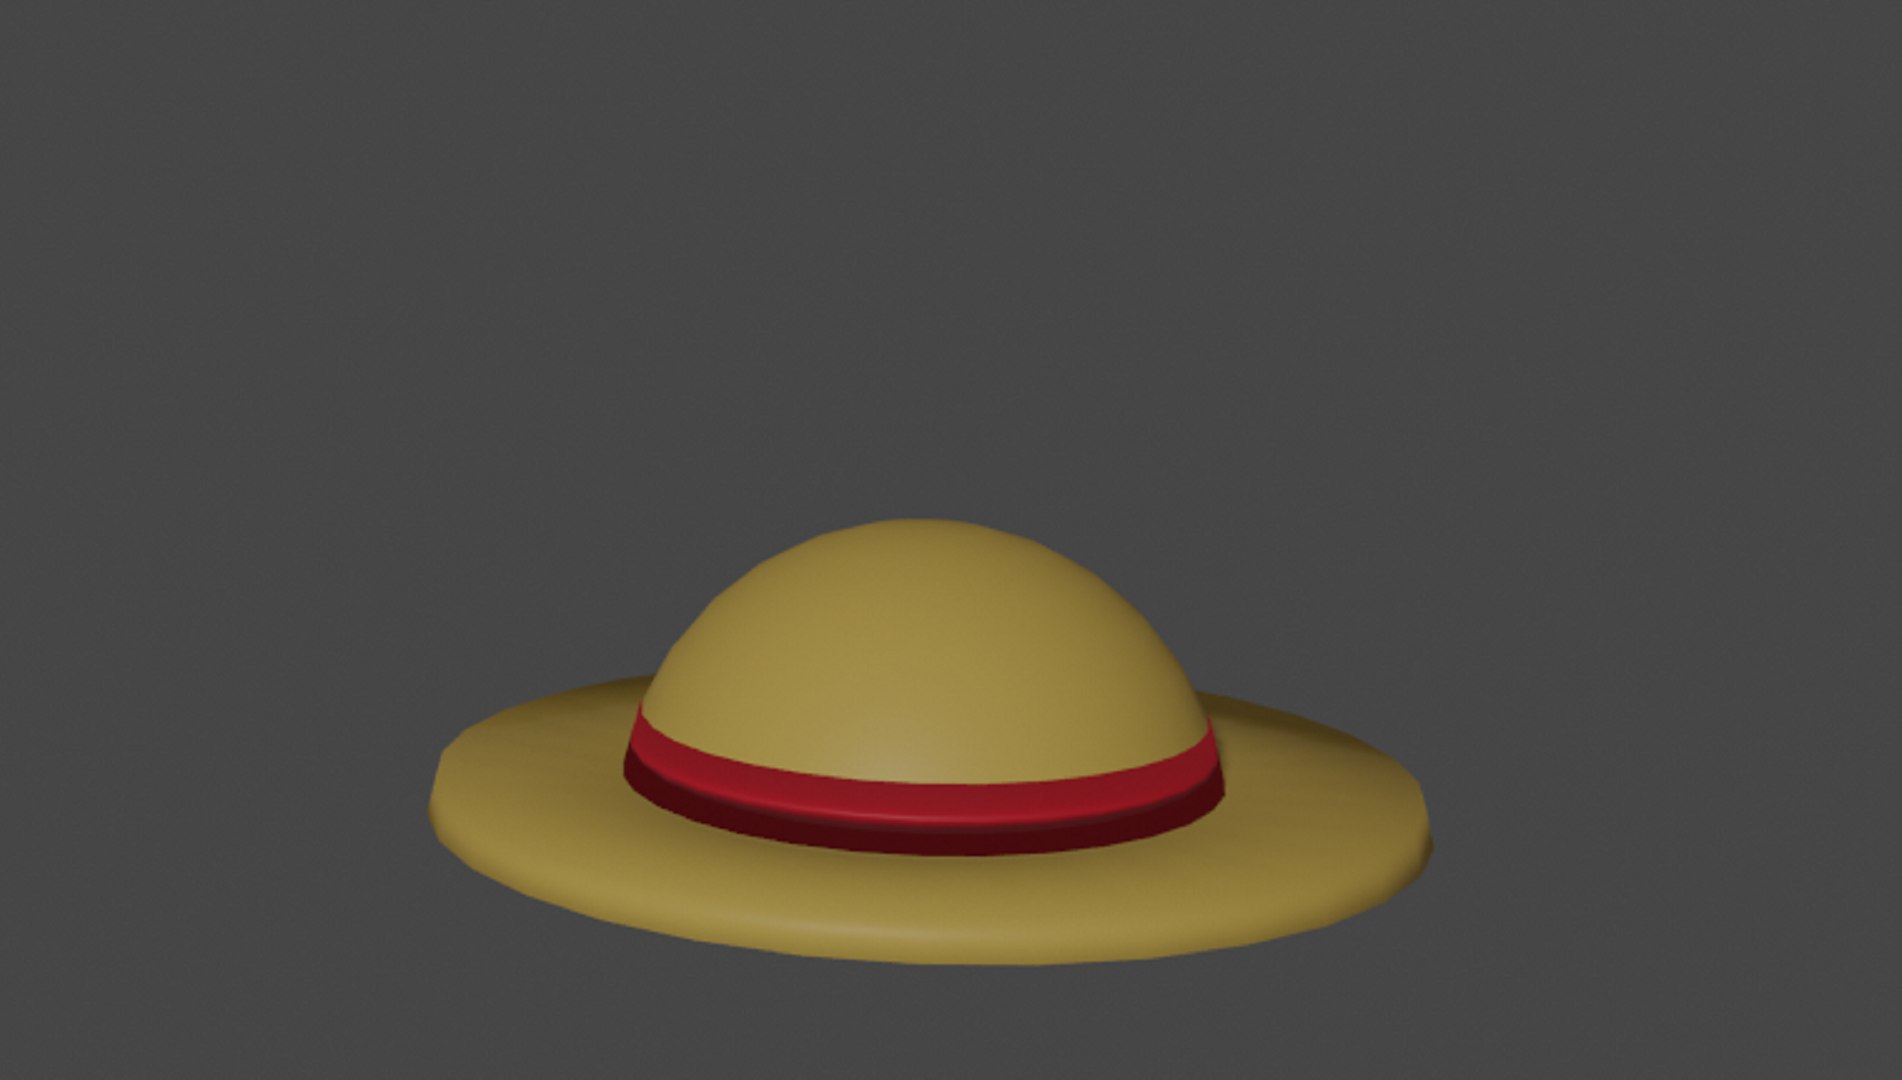 Free Hat With Band - Low Poly 3D Model - TurboSquid 2133873